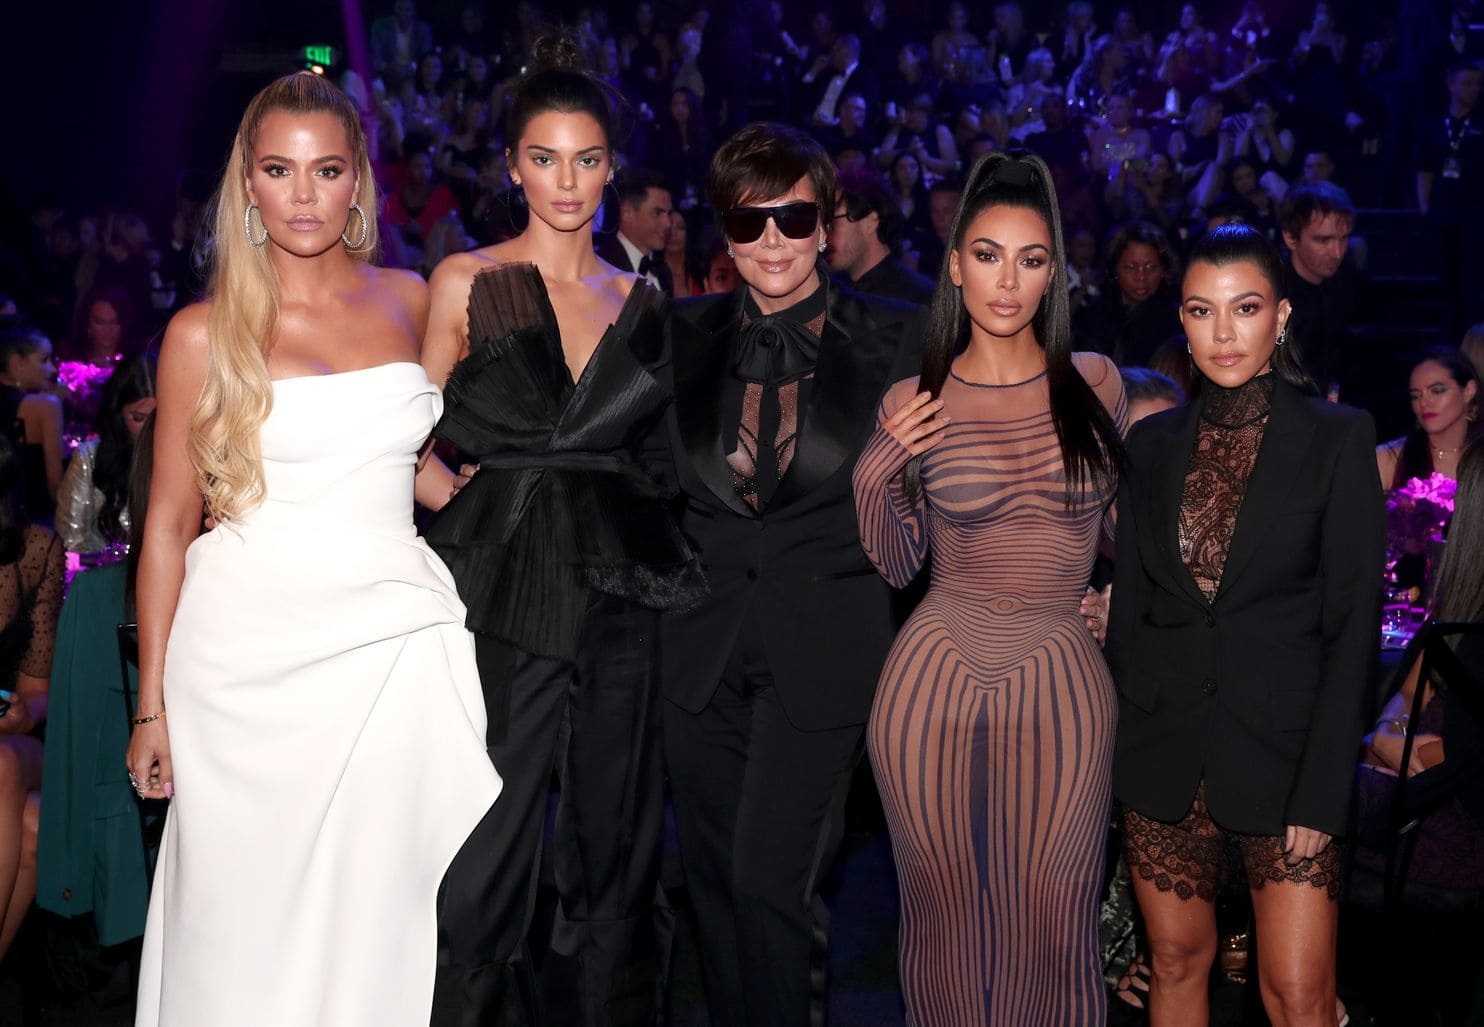 Keeping Up With the Kardashians Season 17 release date